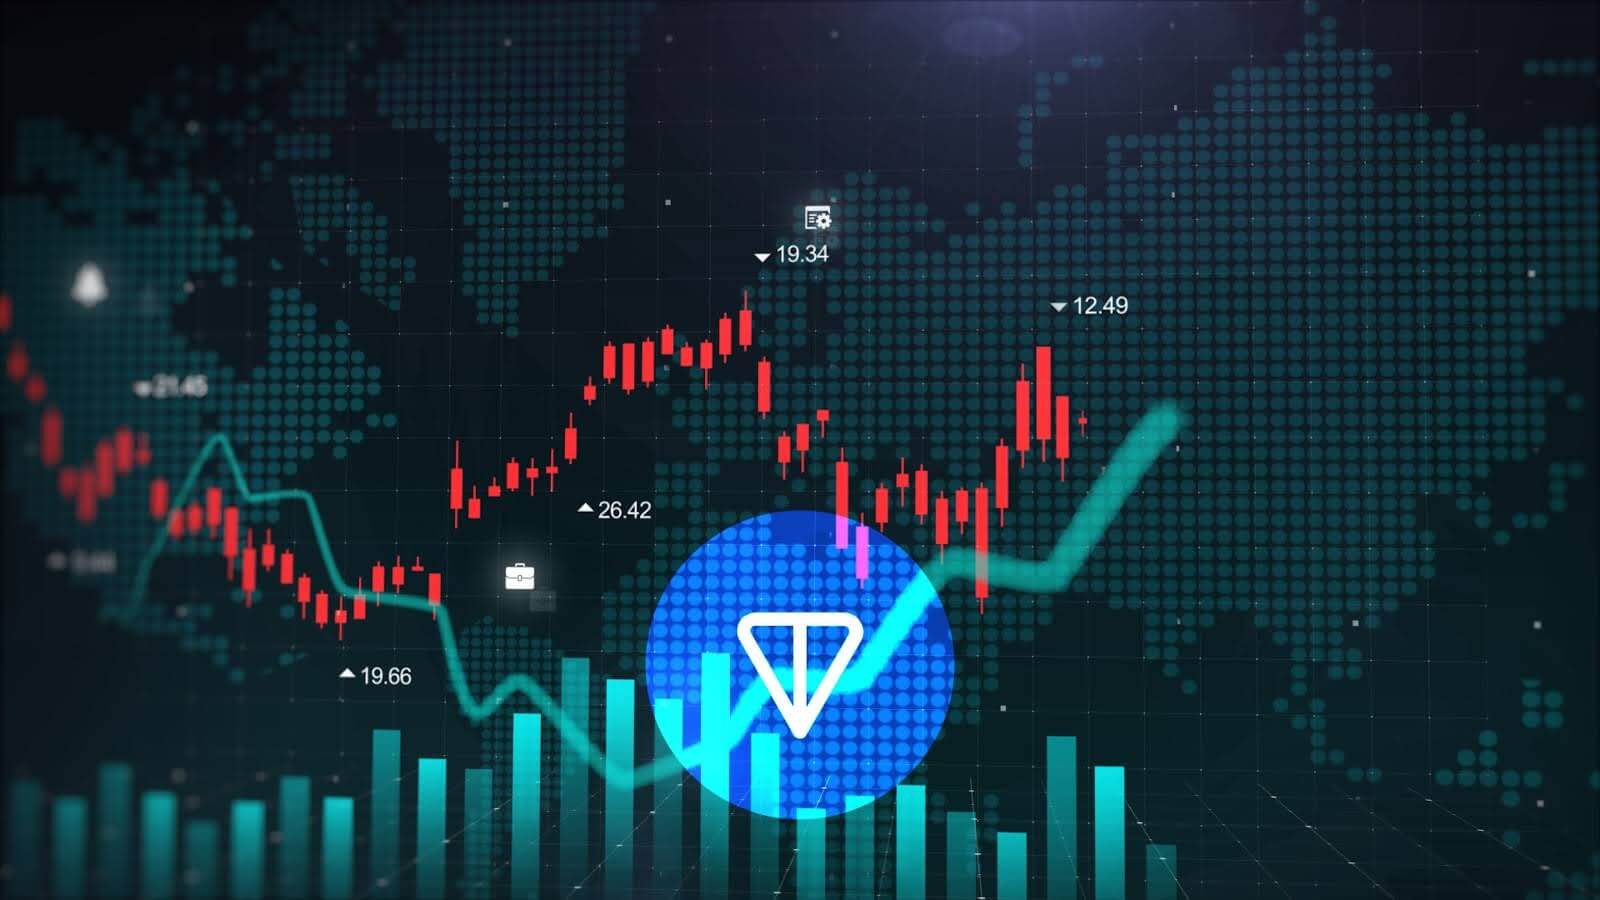 Toncoin (TON) price hits a new all-time high